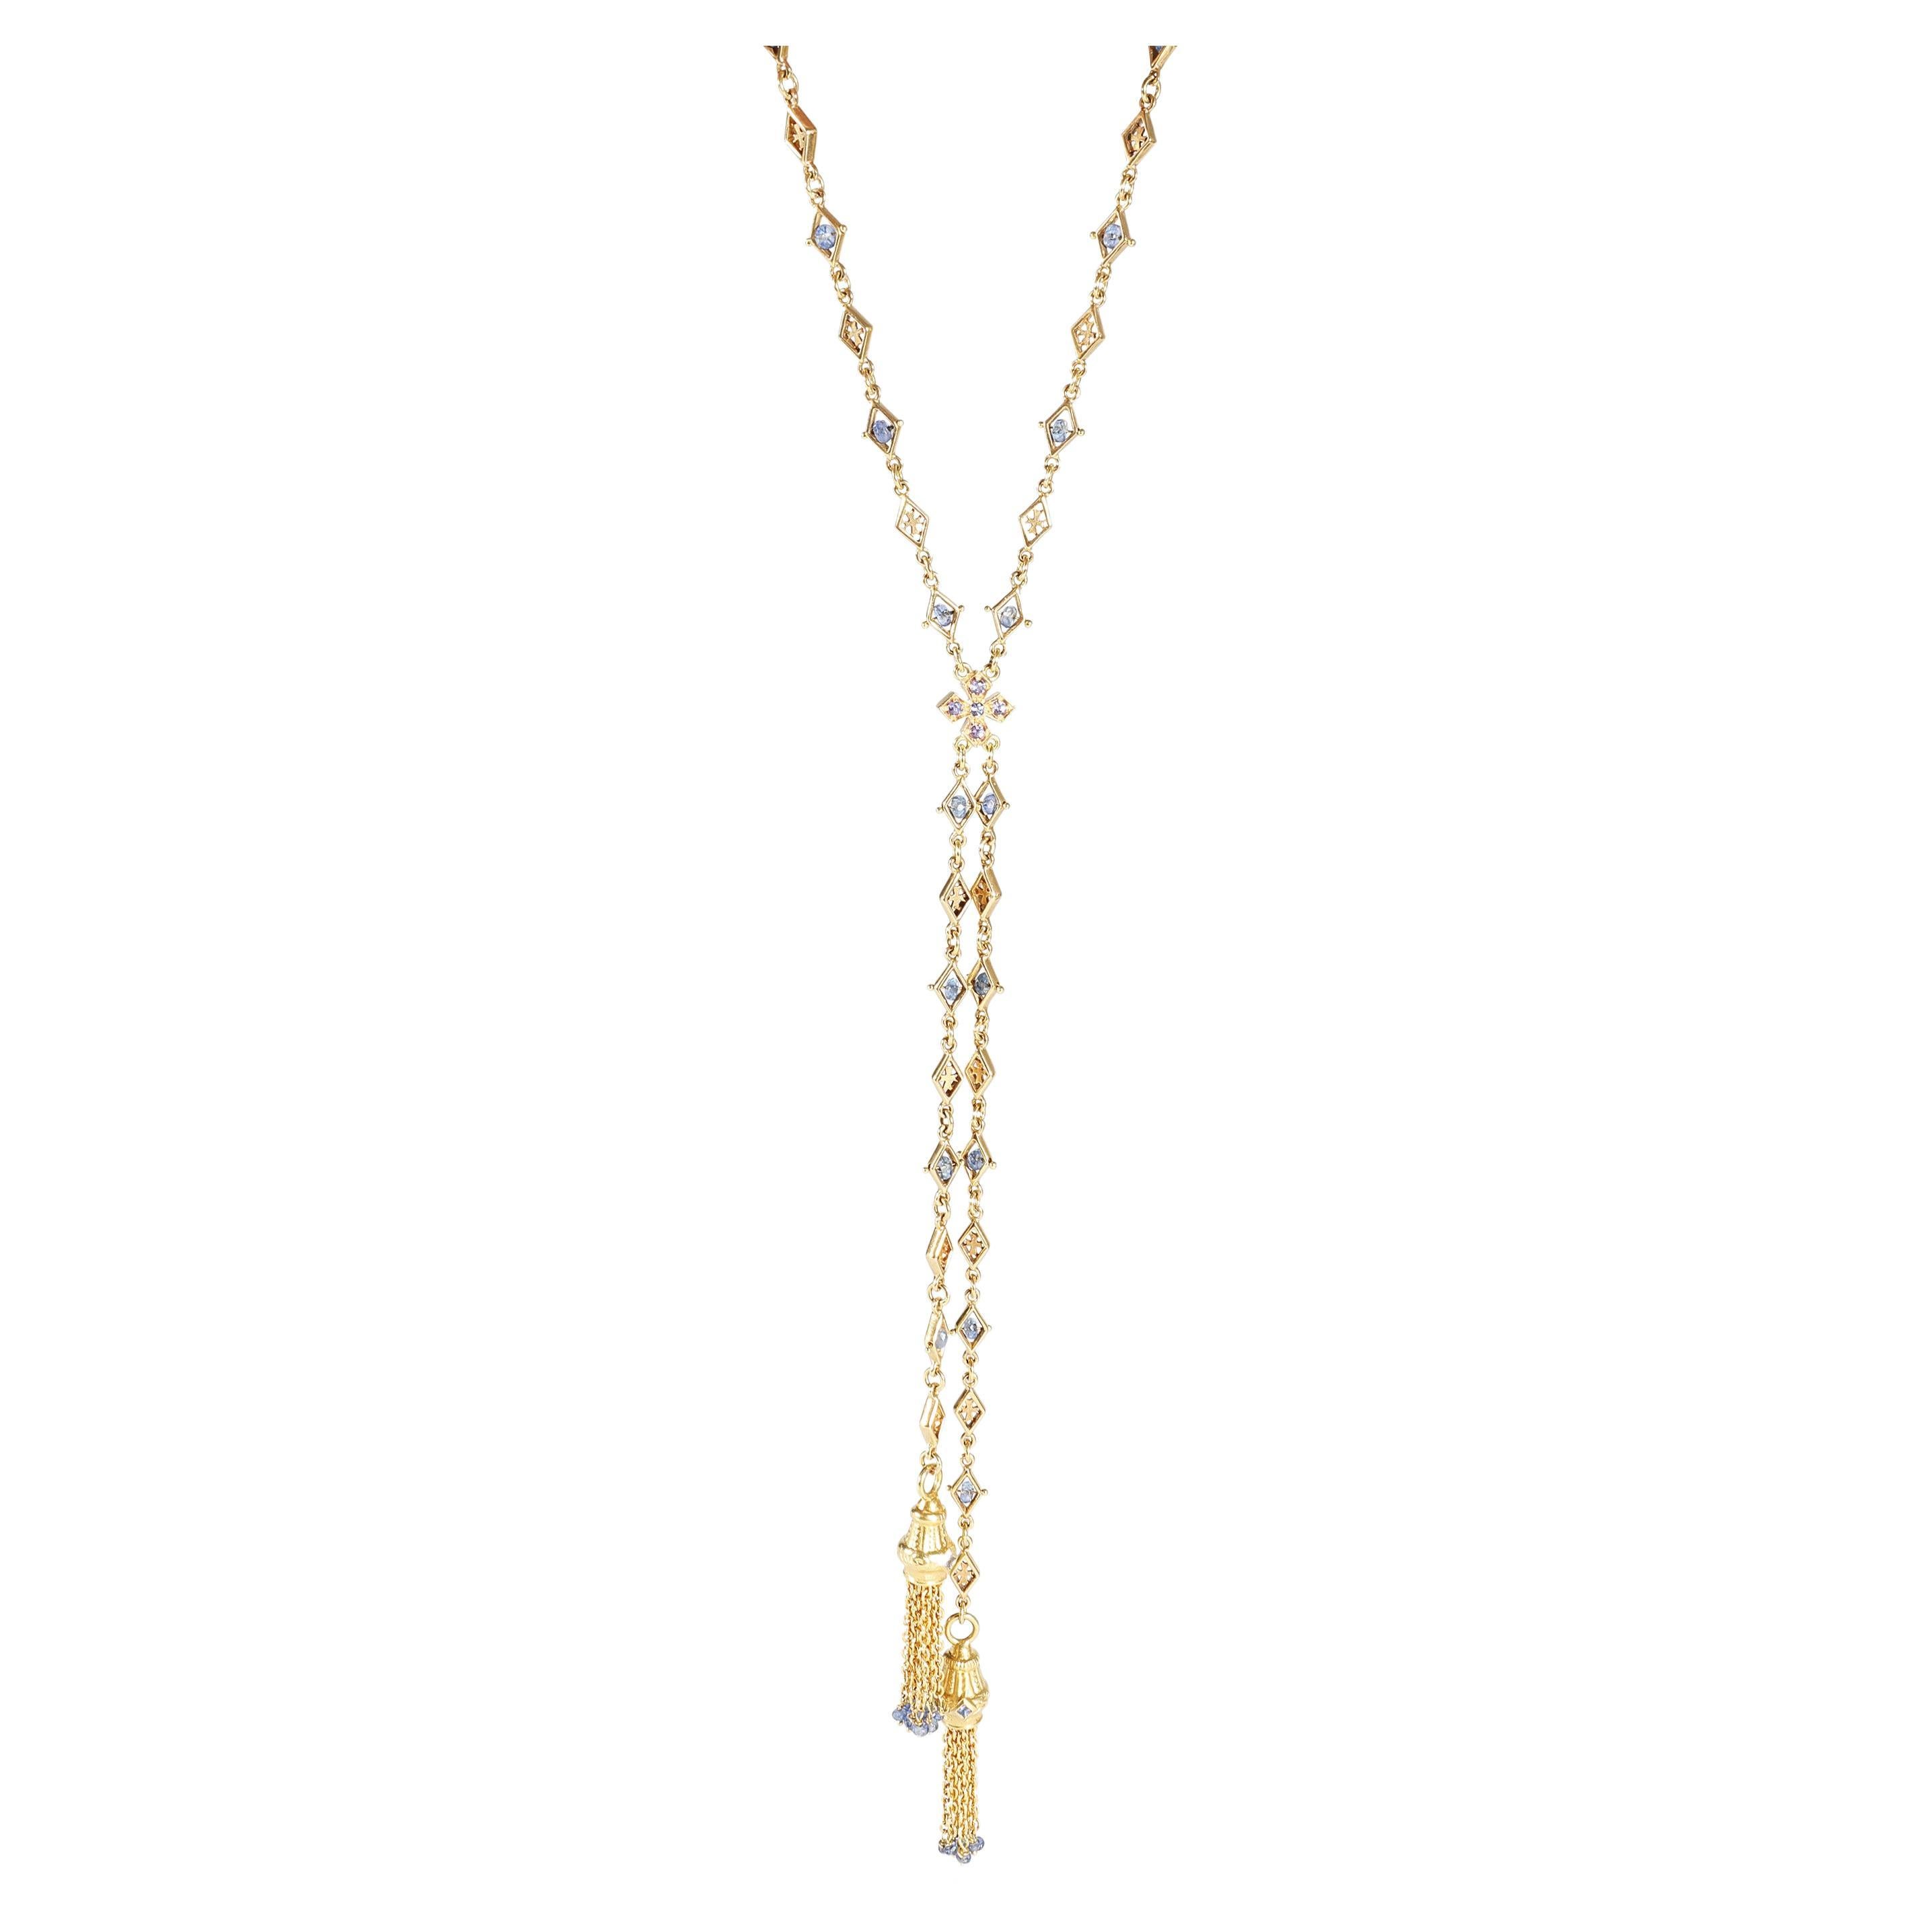 Sapphire Lariat Necklace in 18k Yellow Gold